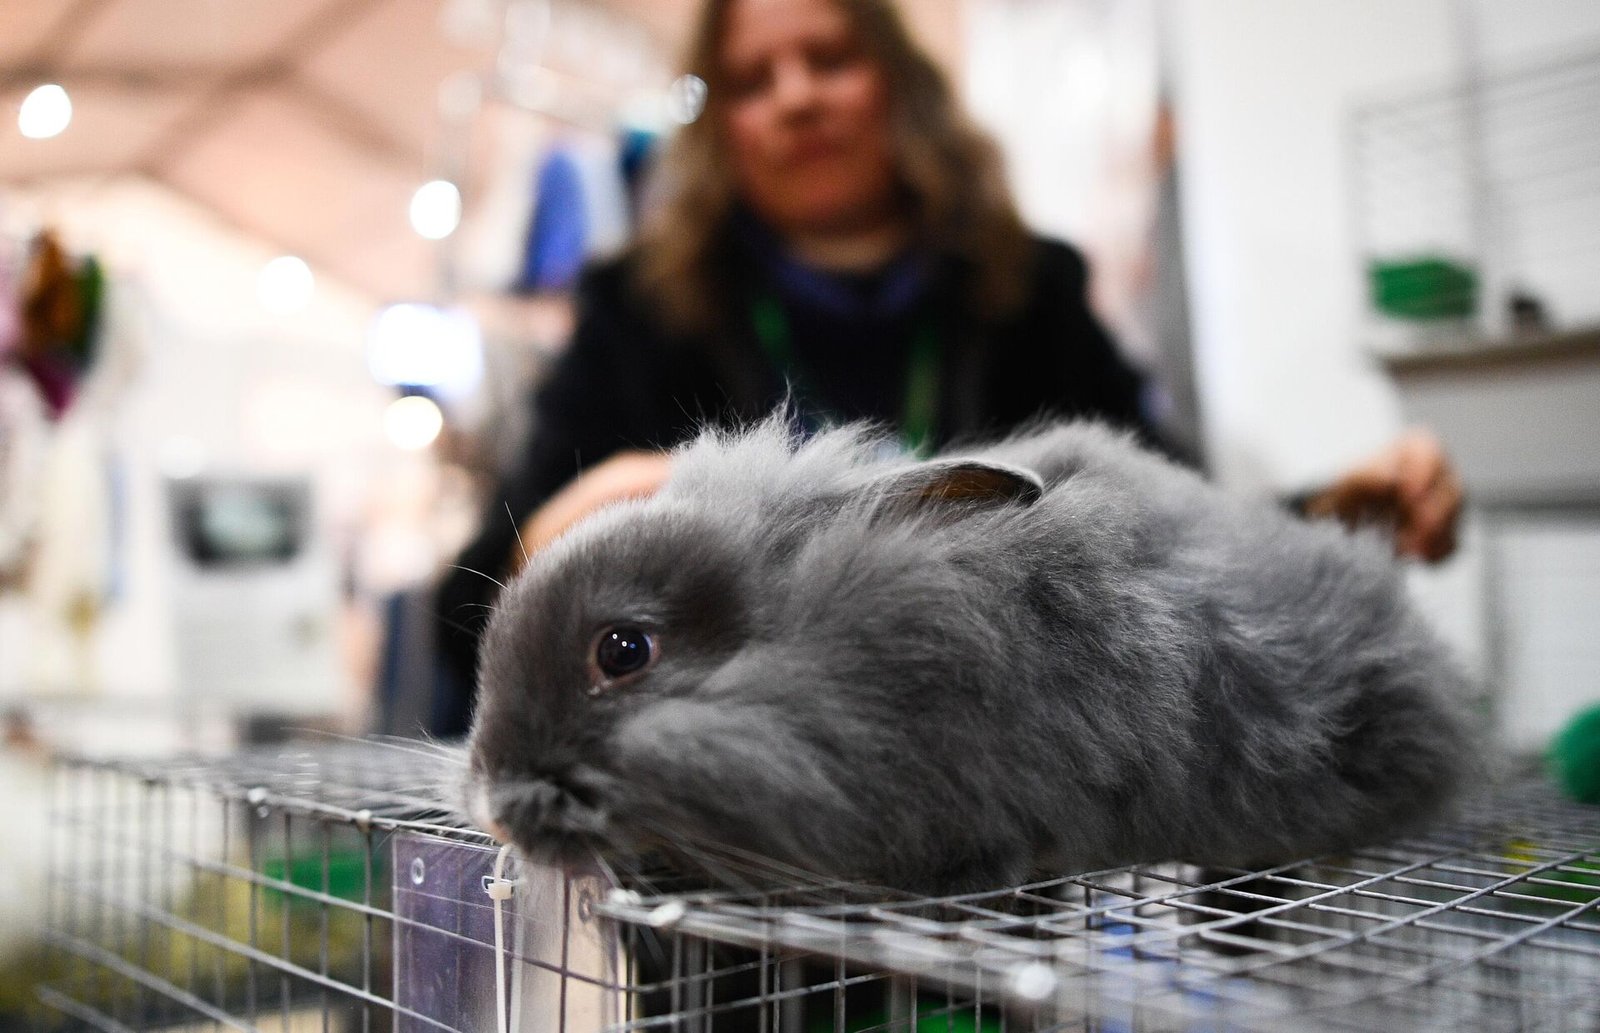 Fluffy Friends Exotics: Your Destination for Decorative Rabbits and Rodents